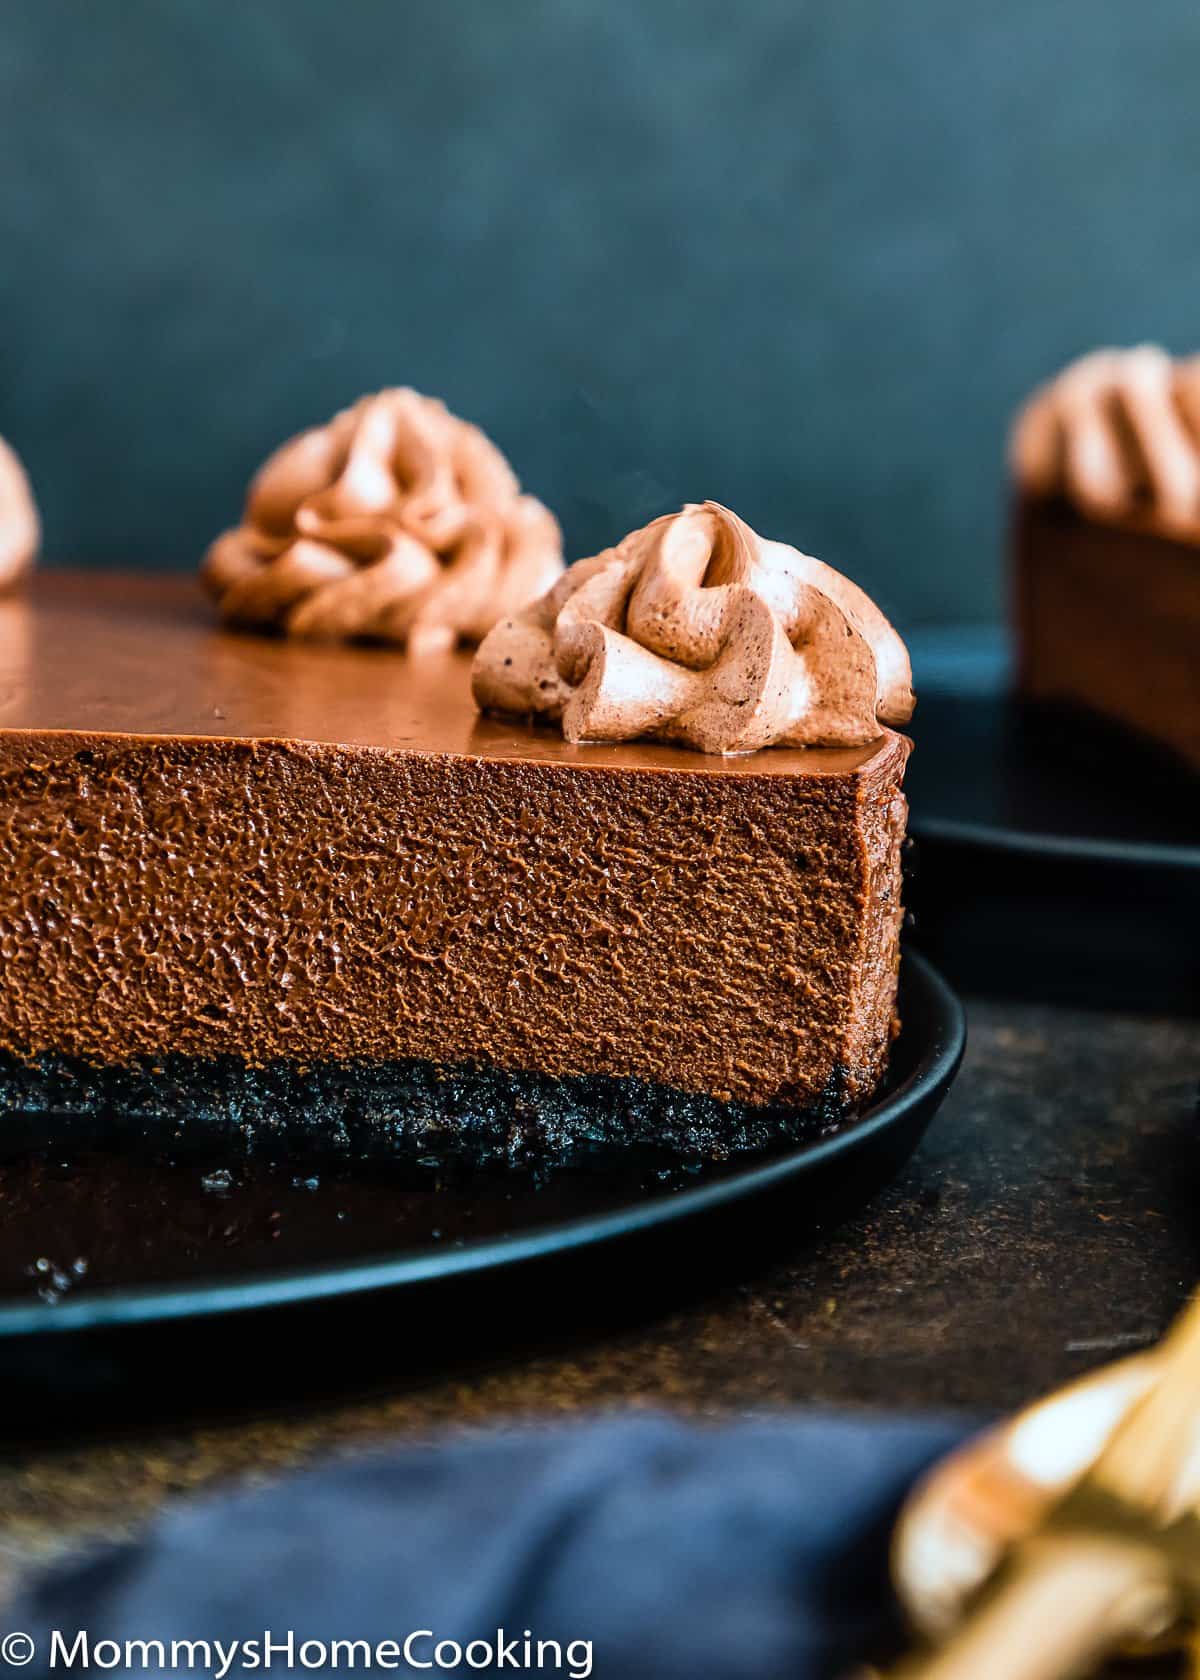 Eggless Chocolate cheesecake sliced showing creamy texture.